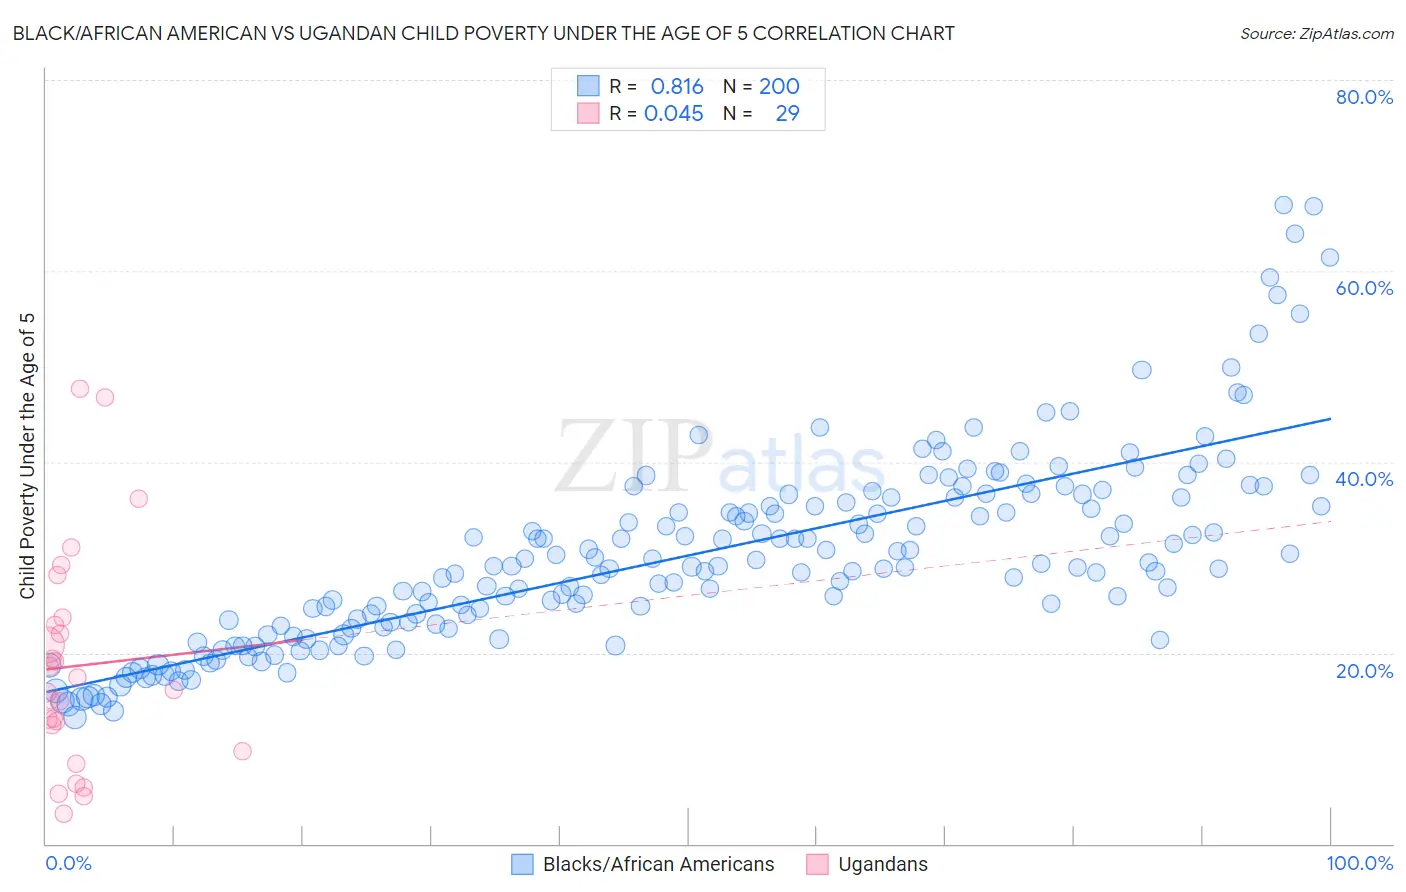 Black/African American vs Ugandan Child Poverty Under the Age of 5